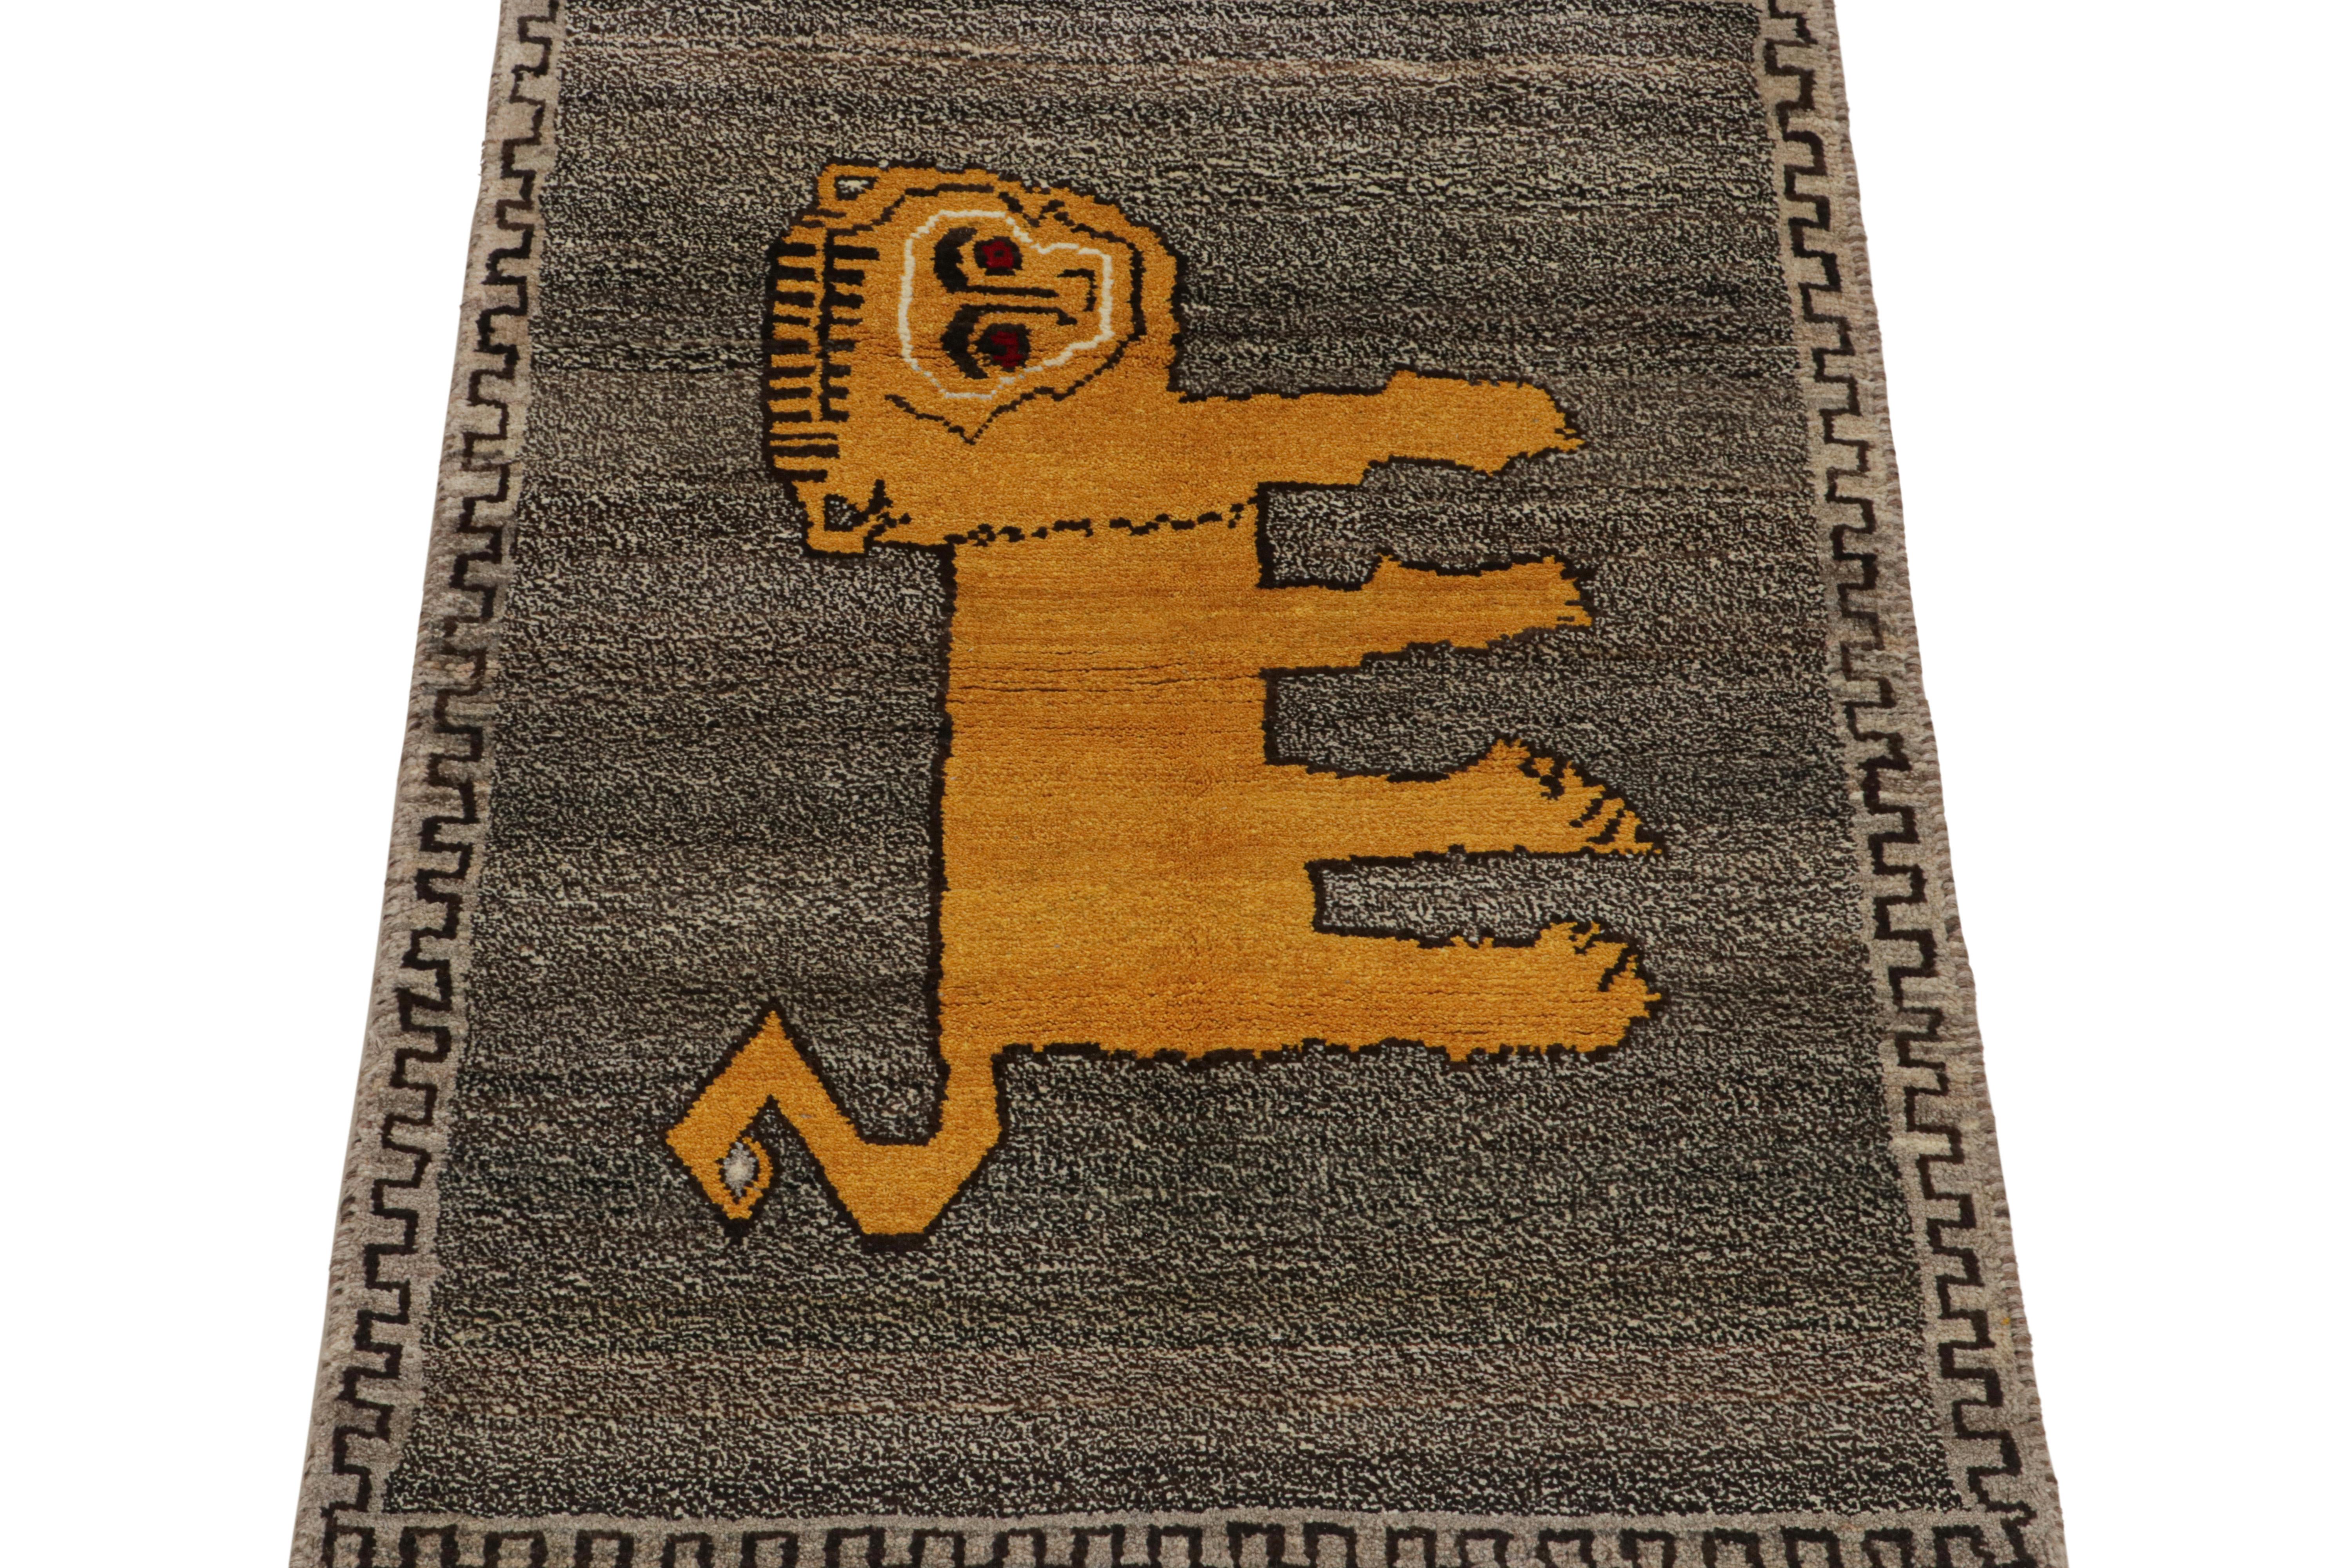 This vintage 3x5 Persian rug is a rare mid-century tribal piece, hand-knotted in wool circa 1950-1960.

Its design enjoys a gold pictorial pattern that resembles a minimalist lion depiction—centered in a beige-brown field with taupe notes.